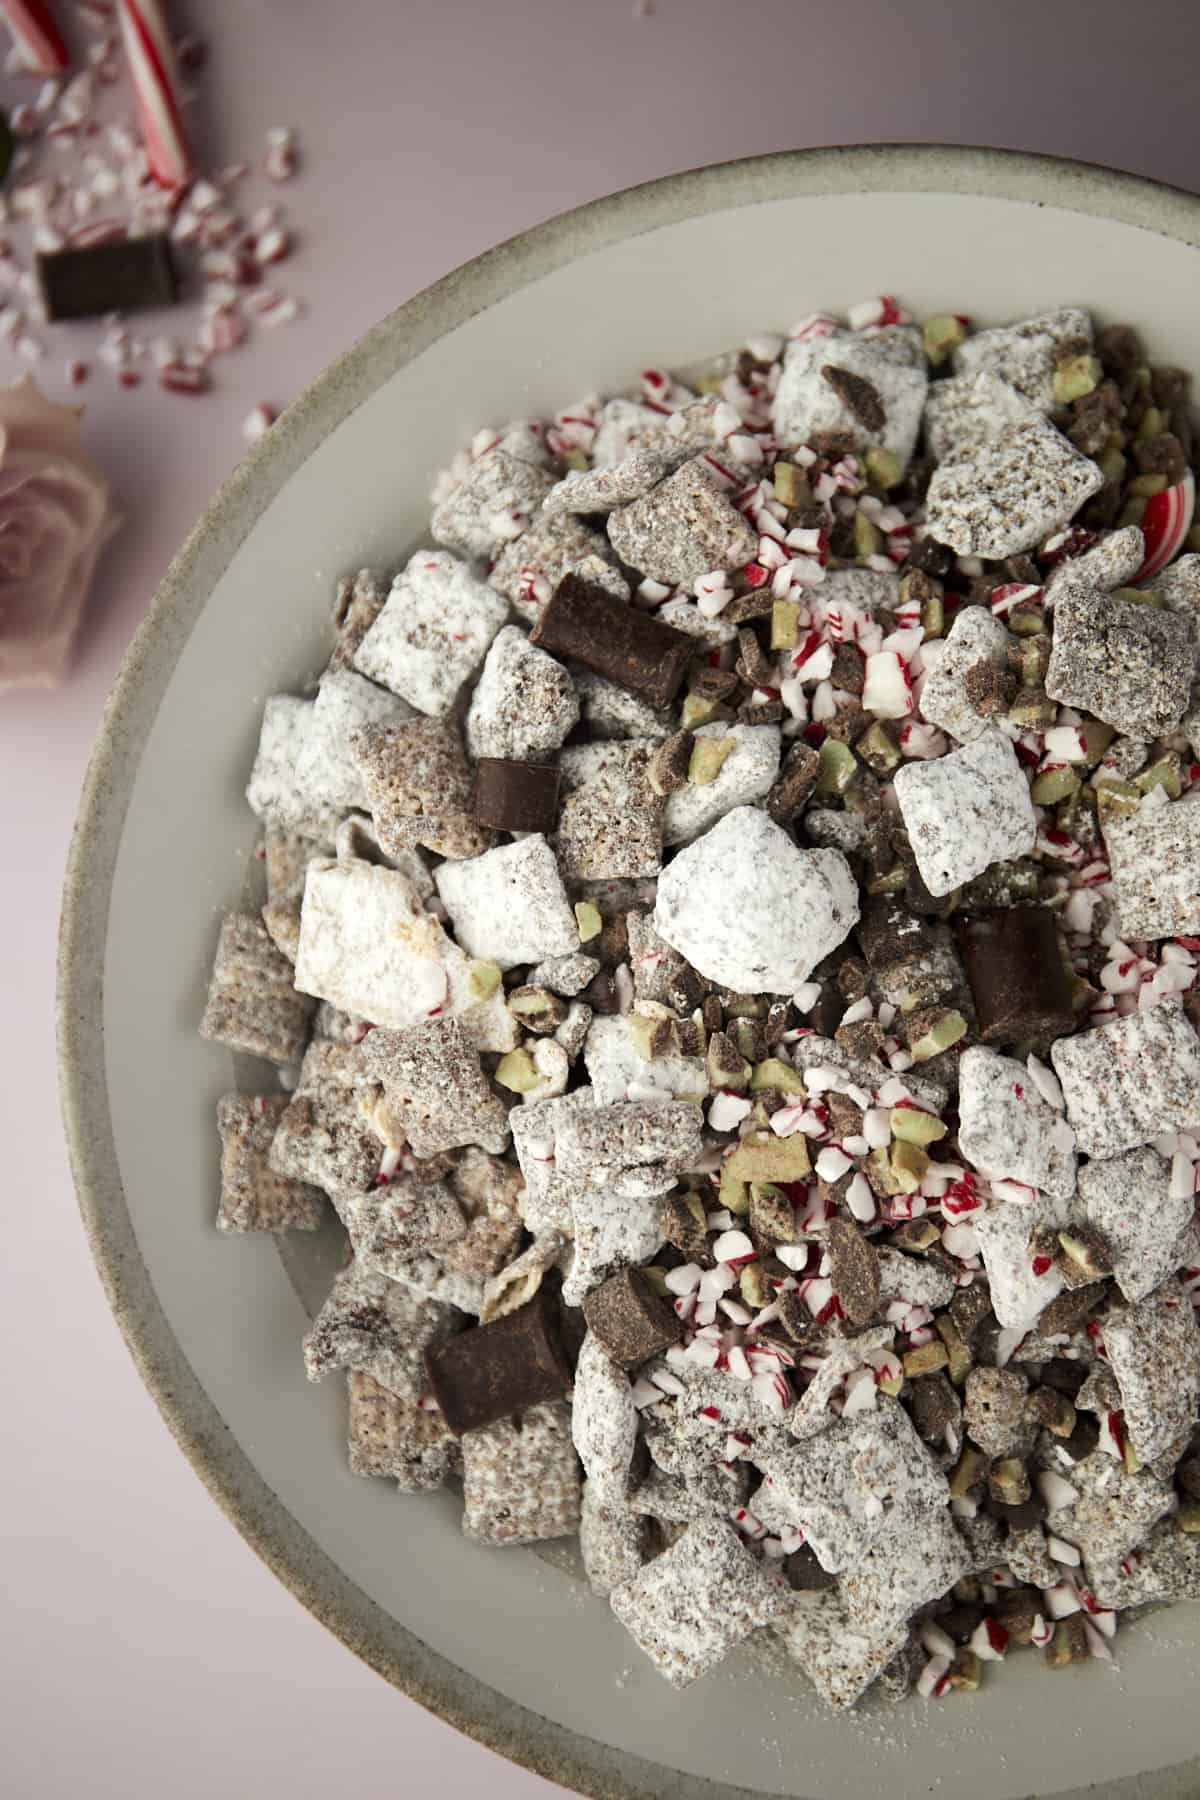 bowl of Christmas puppy chow with chocolate chunks, Andes mints, and peppermint pieces.